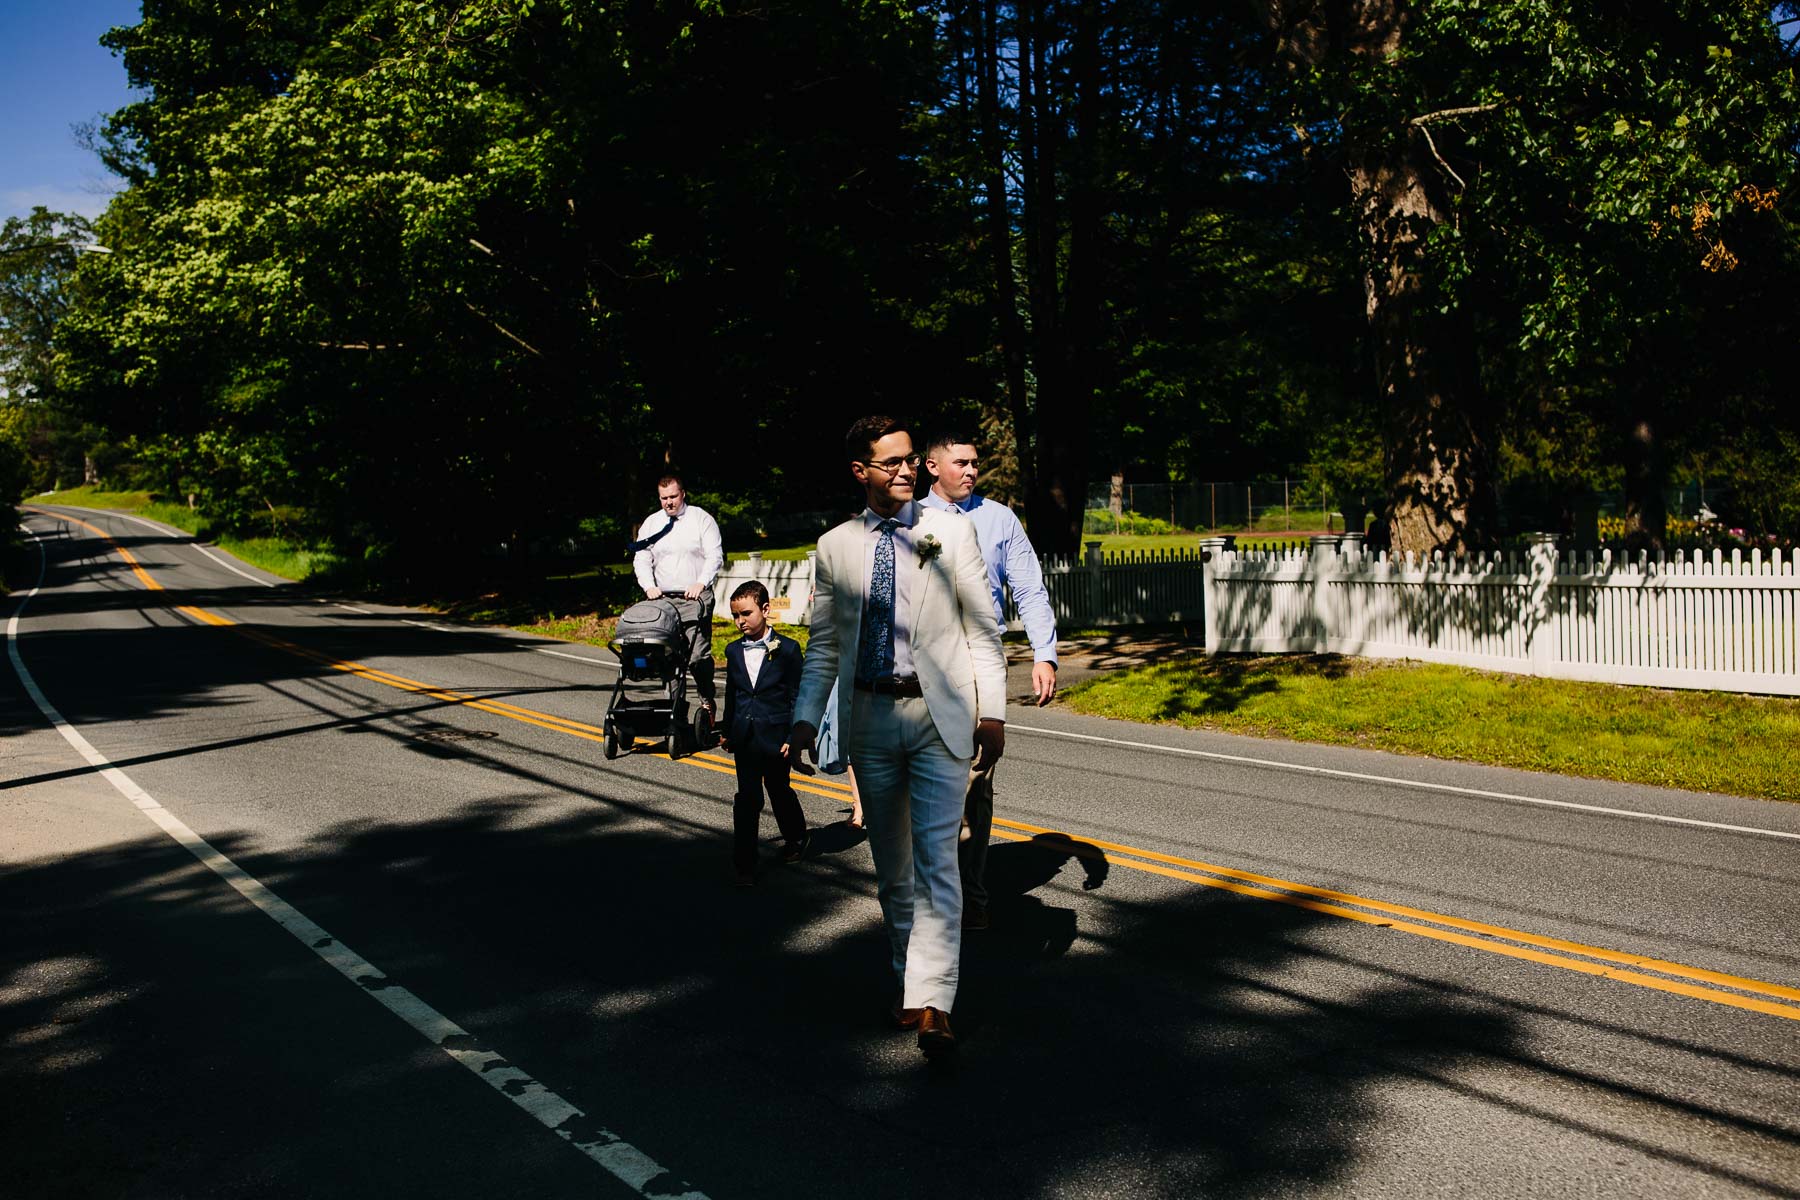 grooms walks to church for wedding ceremony, Kent, Connecticut